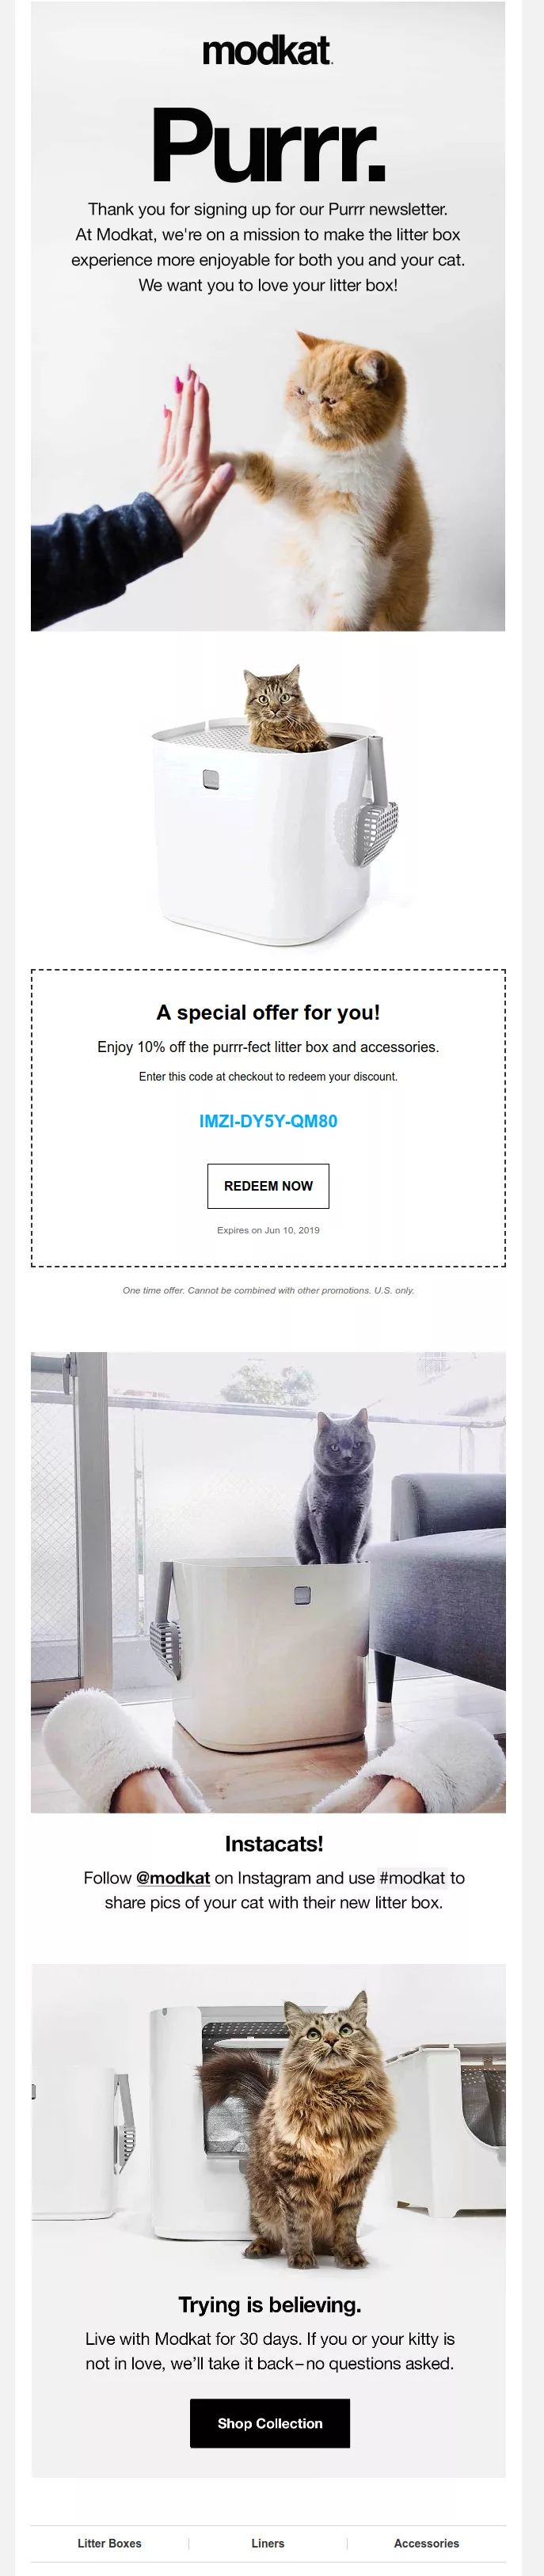 modkat offer in their welcome email